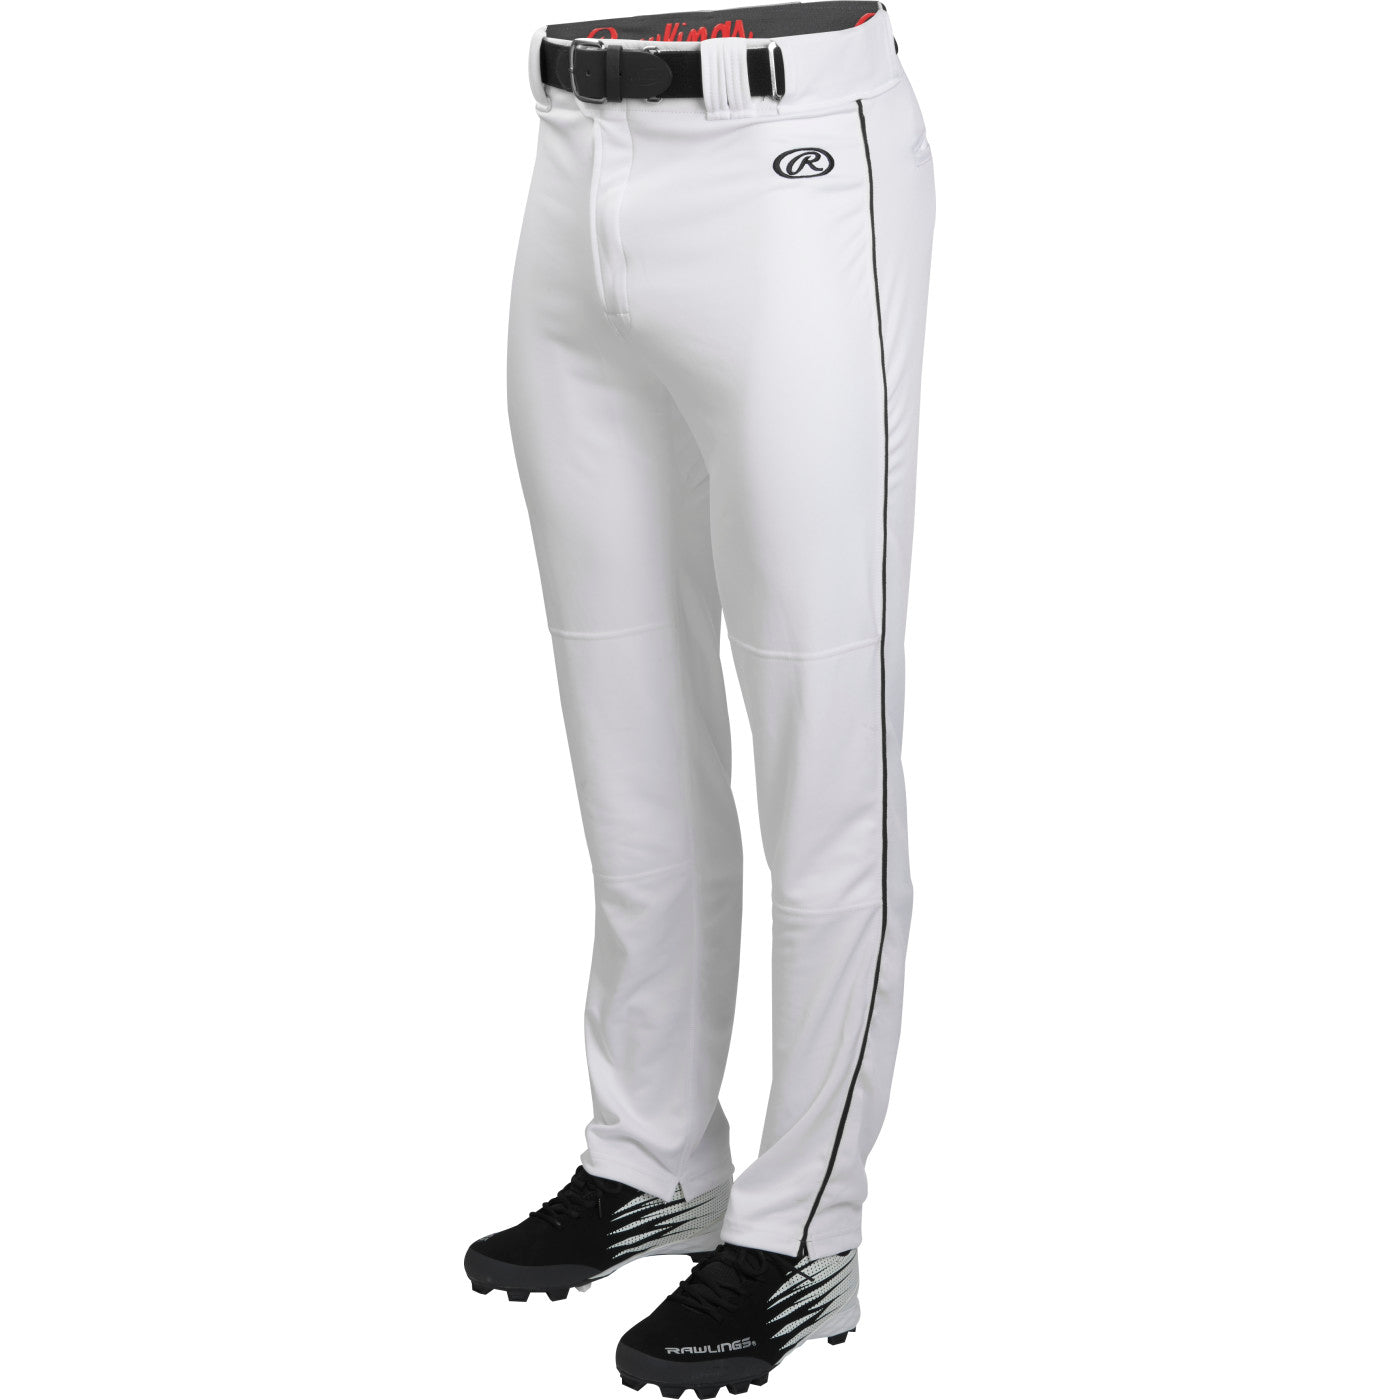 rawlings-launch-youth-piped-pant-ylnchsrp